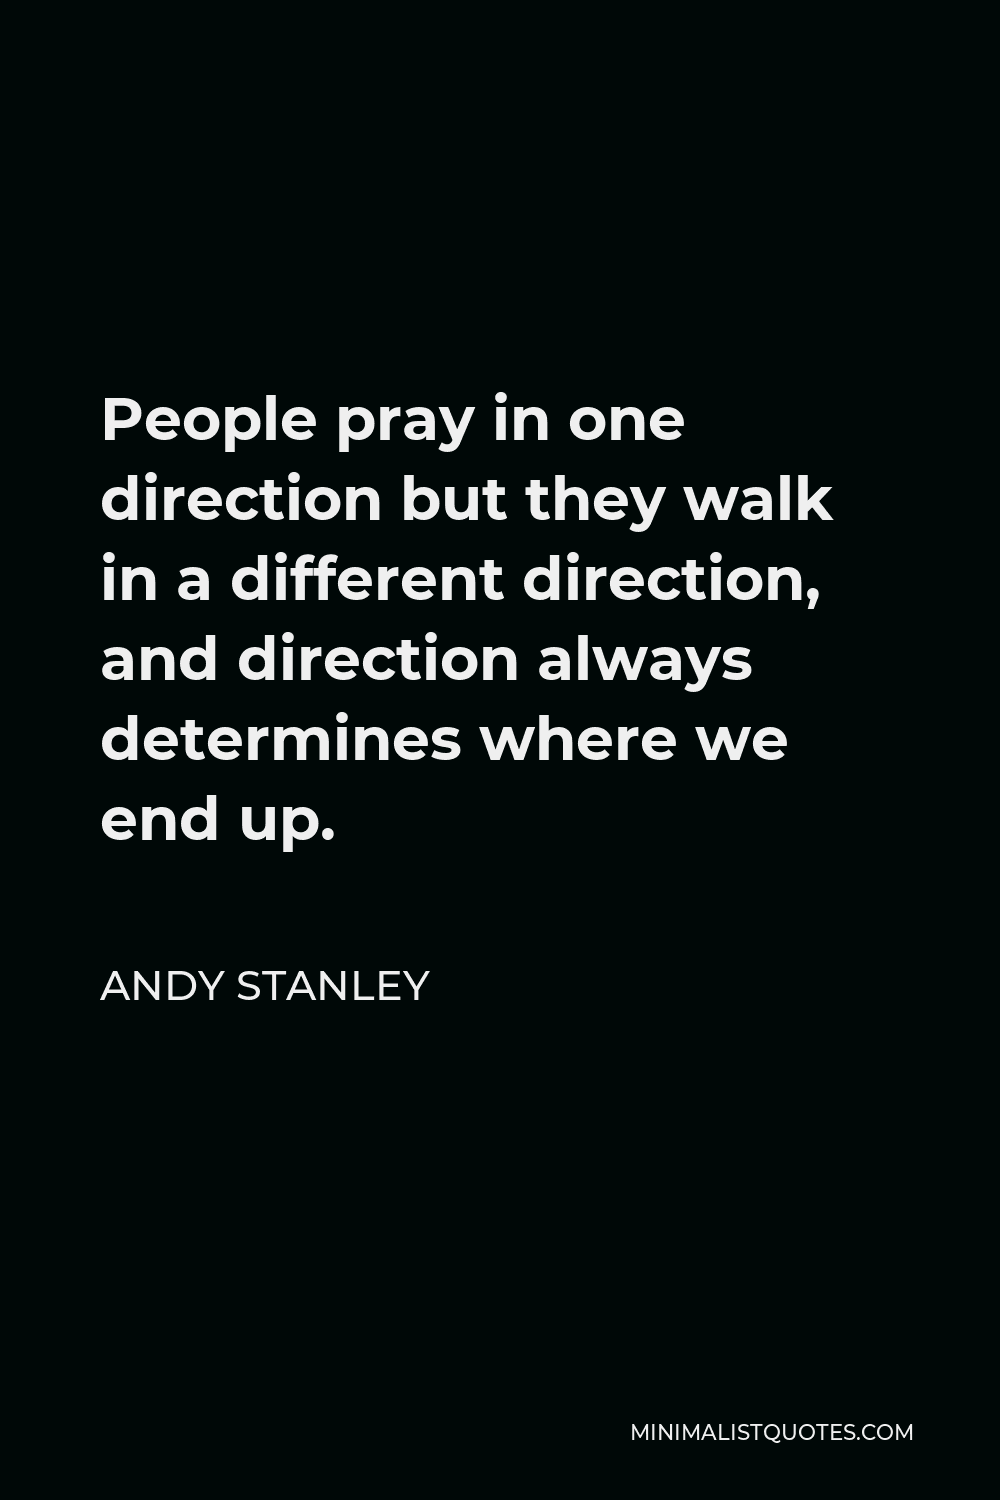 Andy Stanley Quote - People pray in one direction but they walk in a different direction, and direction always determines where we end up.